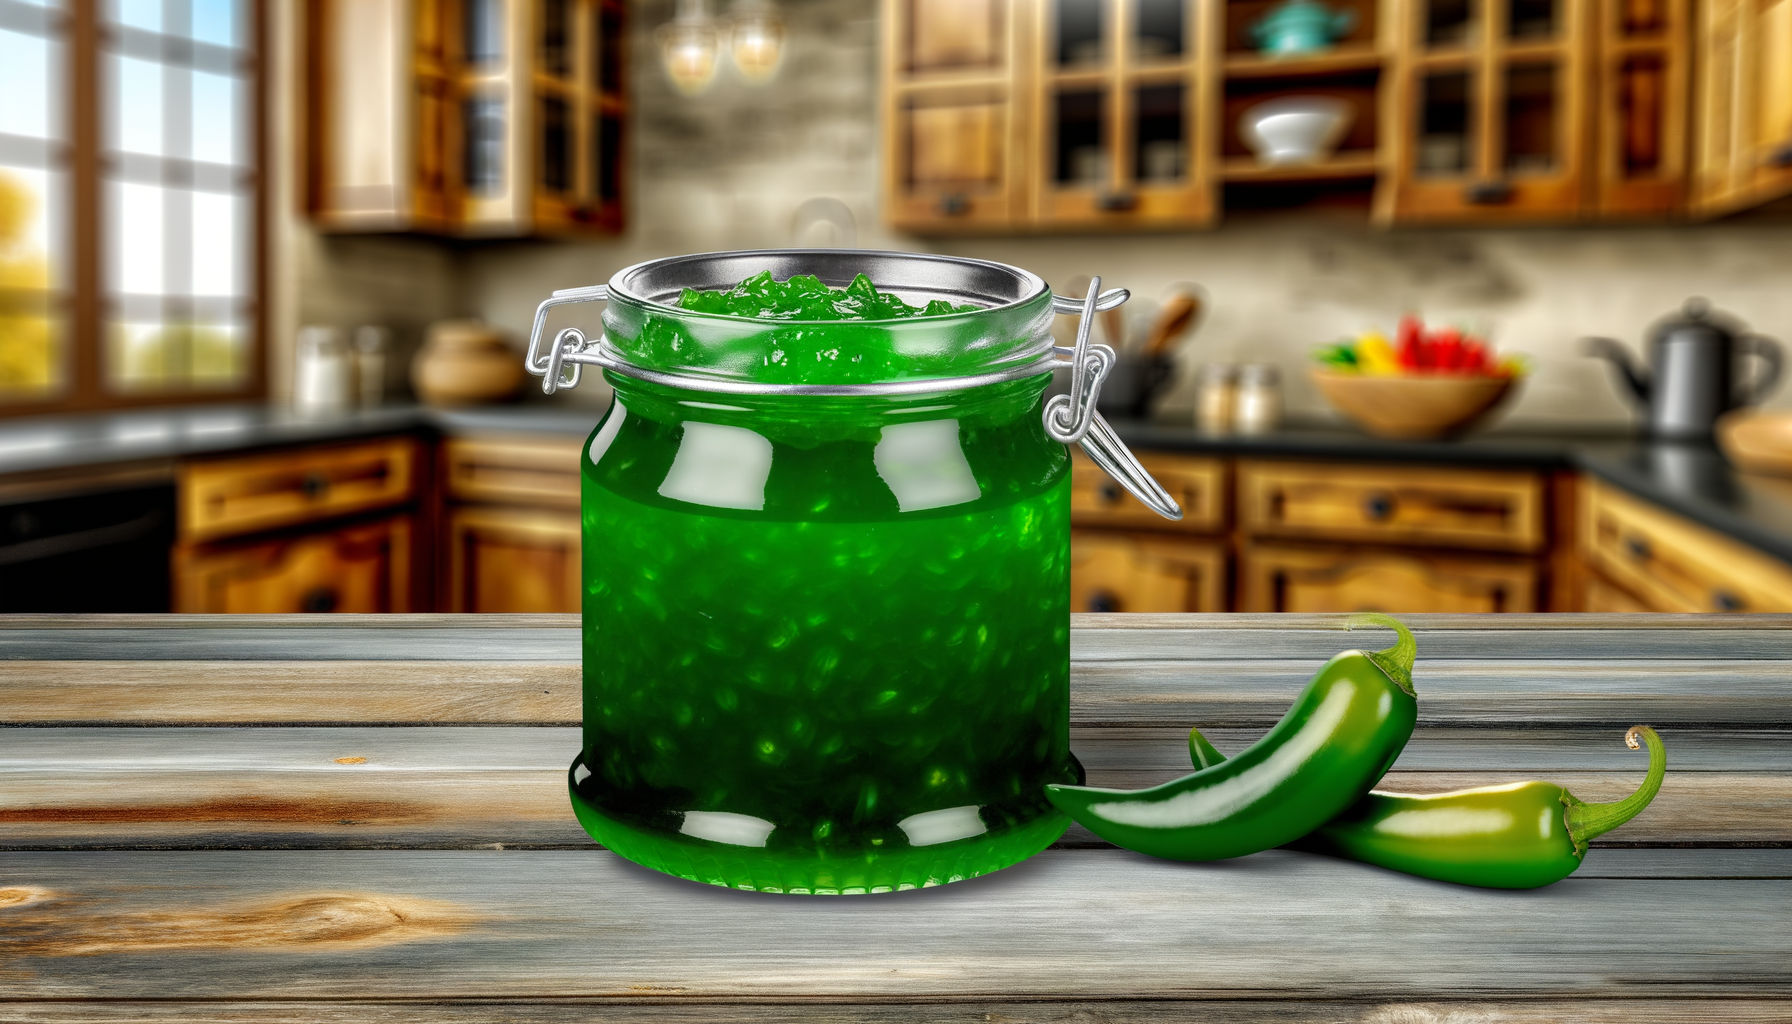 Texas Jalapeno Jelly in a clear jar on a wooden table with fresh jalapenos around, in a warm kitchen setting.